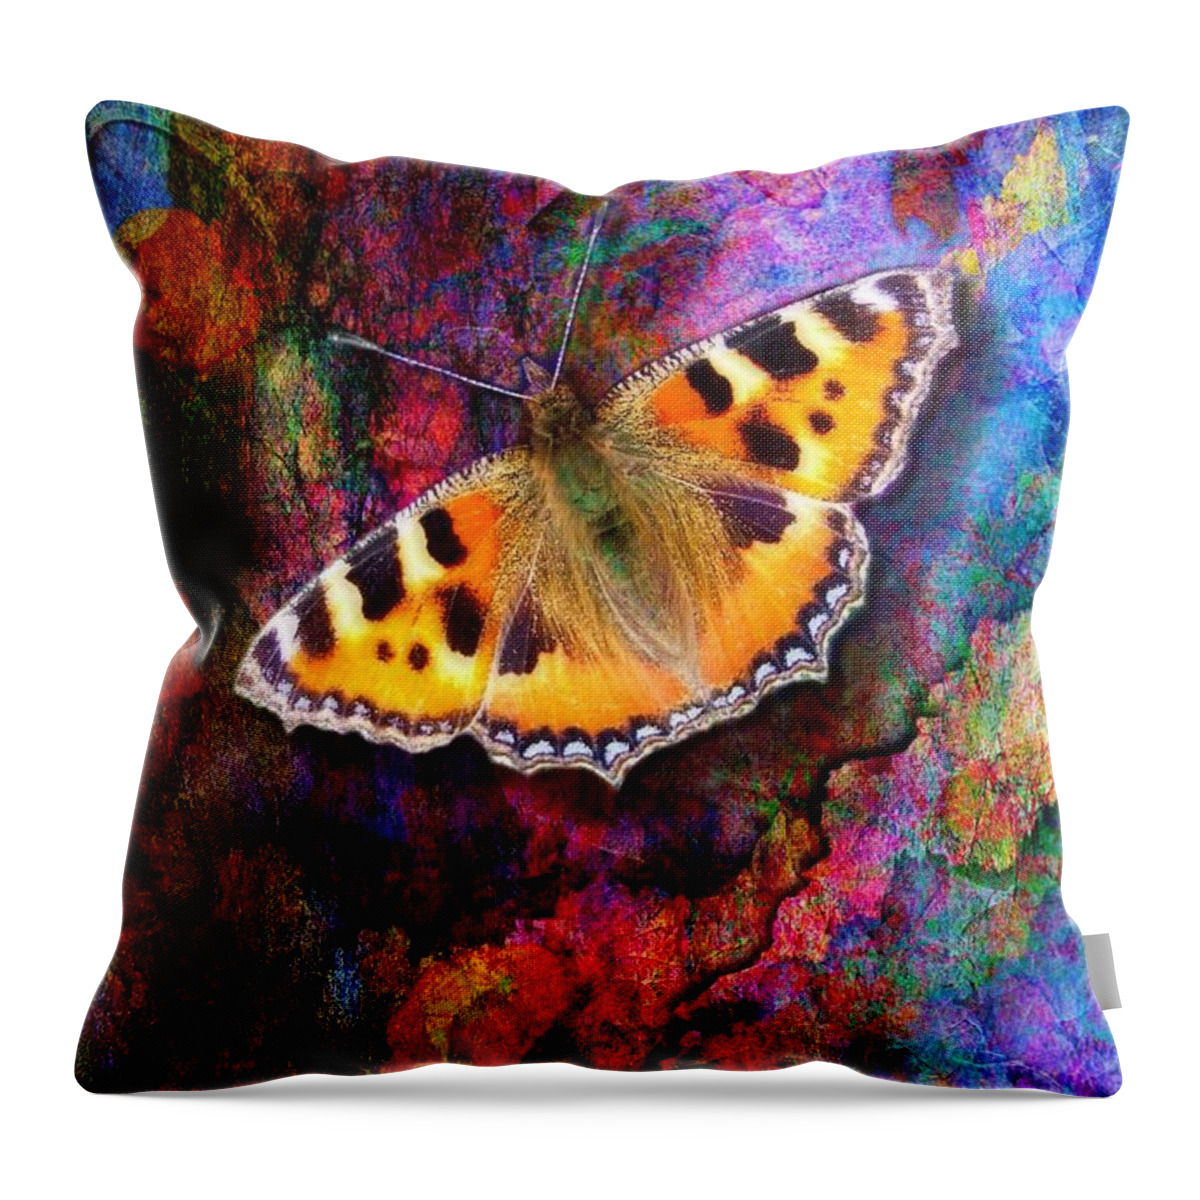 Colorful Throw Pillow featuring the digital art Colorful butterfly by Lilia S